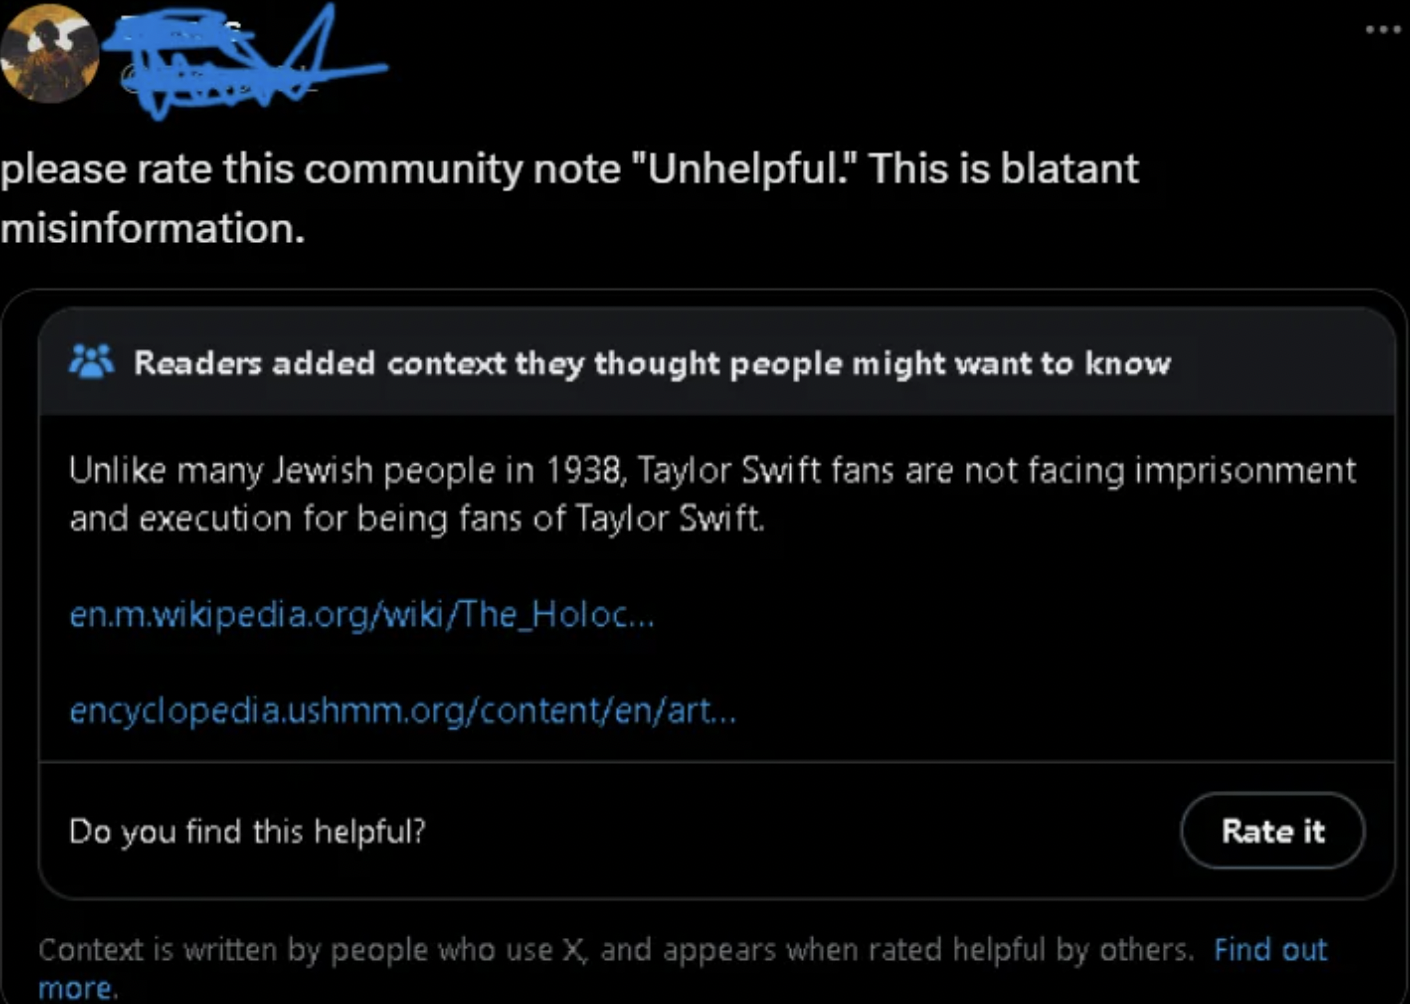 screenshot - please rate this community note "Unhelpful." This is blatant misinformation. B Readers added context they thought people might want to know Un many Jewish people in 1938, Taylor Swift fans are not facing imprisonment. and execution for being 